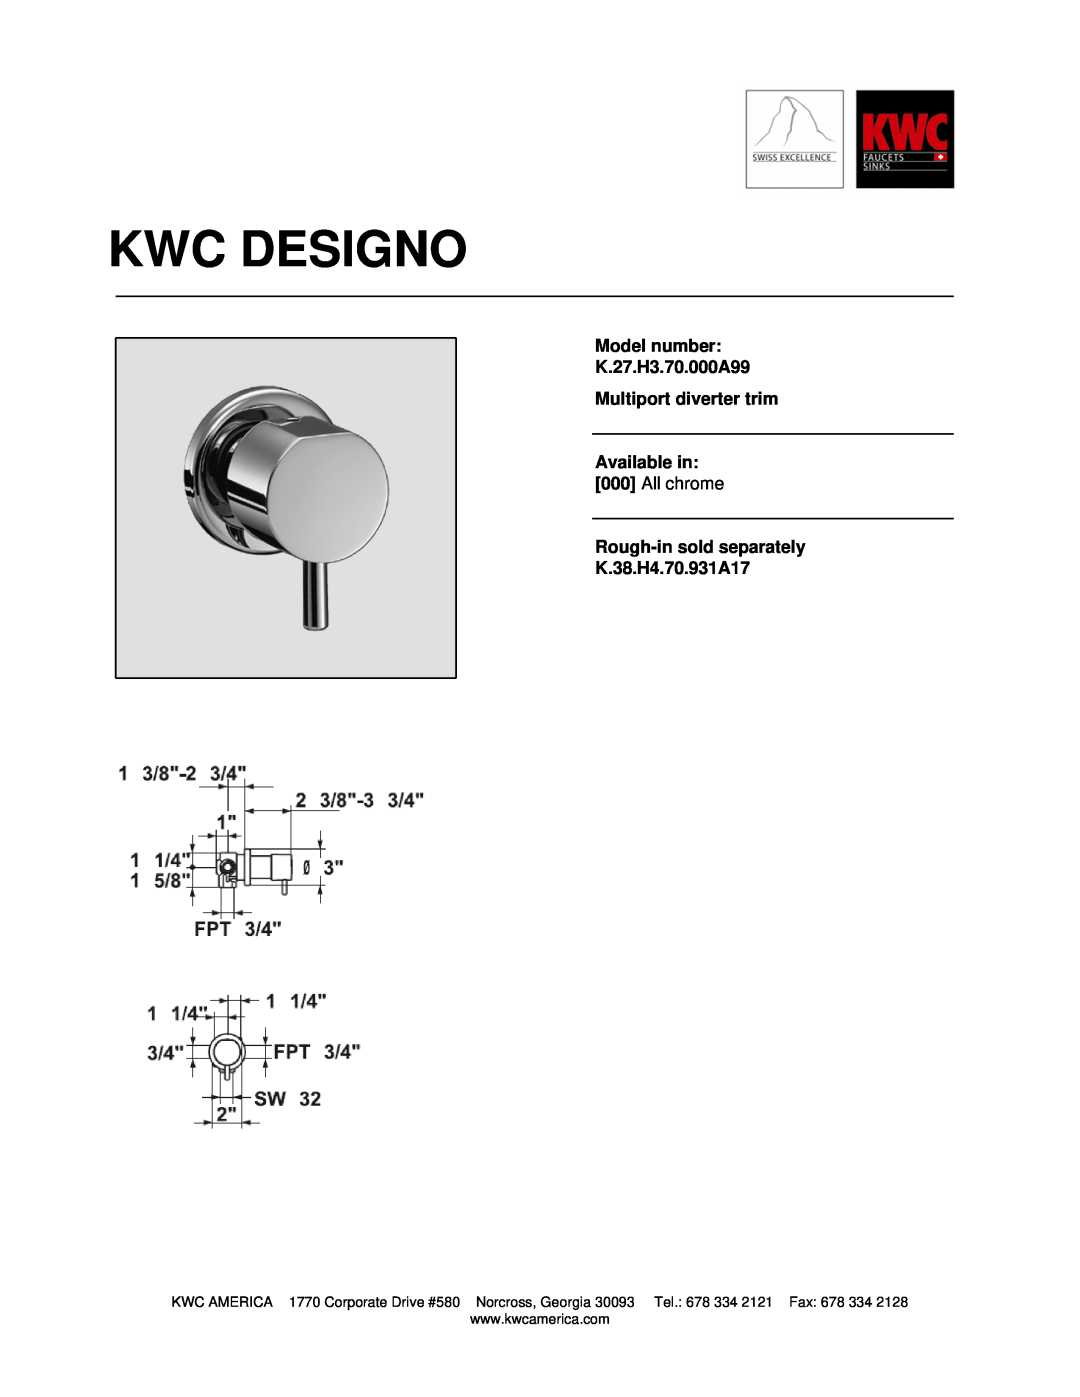 KWC manual Kwc Designo, Model number K.27.H3.70.000A99, Multiport diverter trim, Available in 000 All chrome 